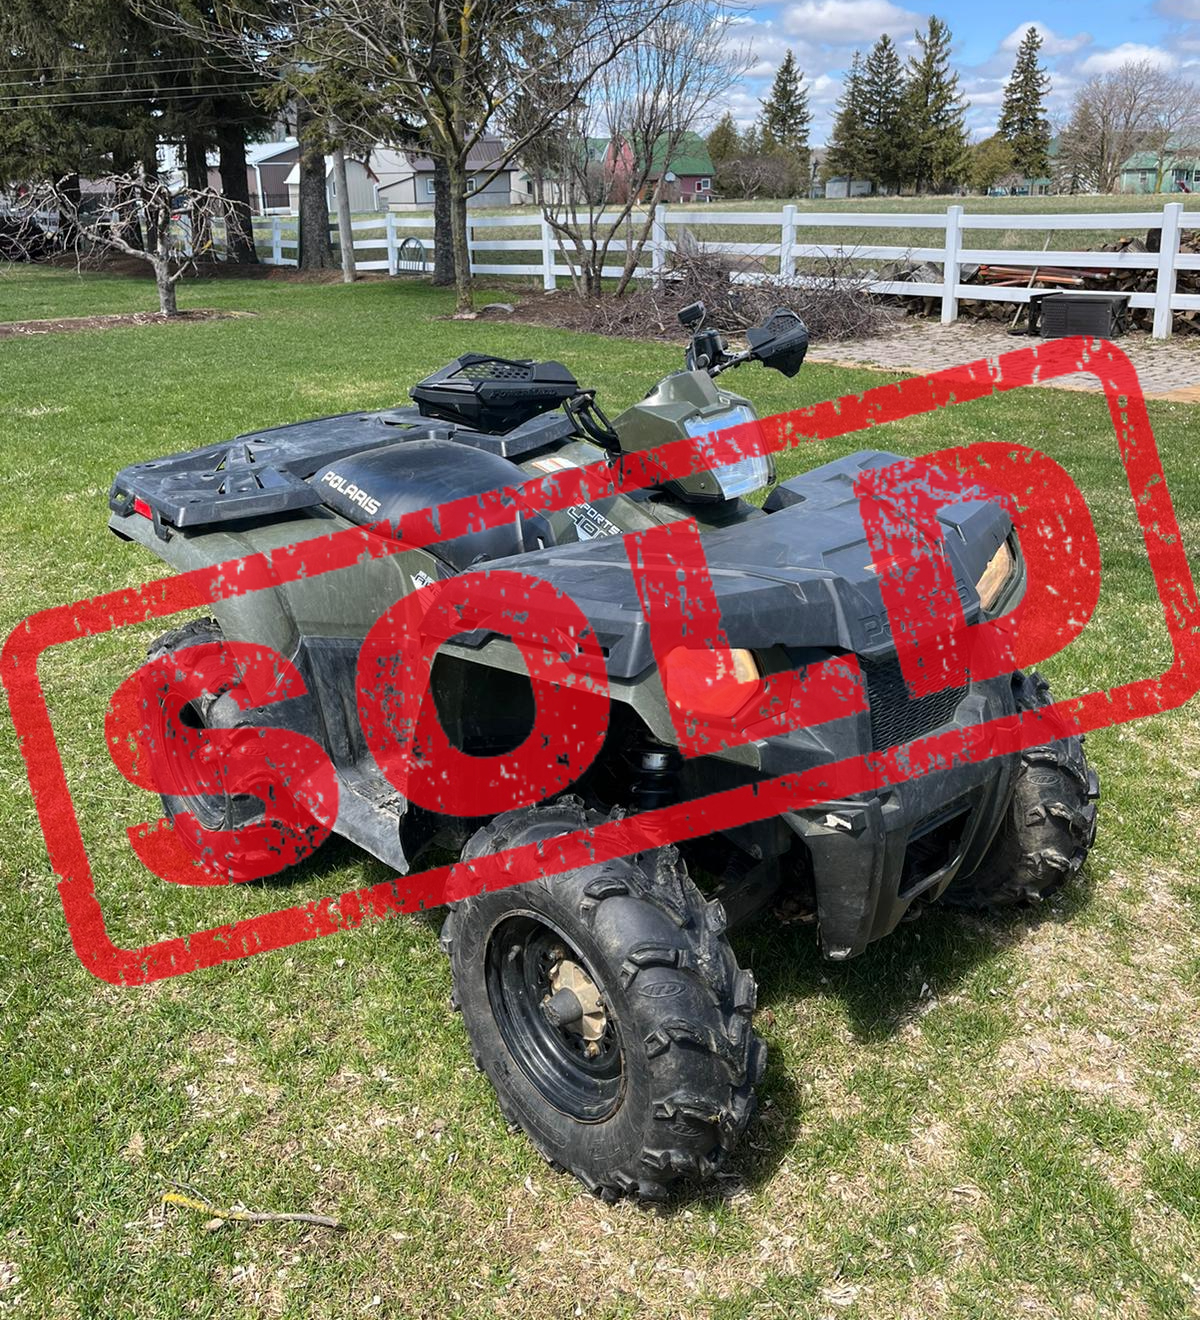 2013 Polaris Sportsman 400 4X4 Completely Serviced - New Brakes - Consignment Sale